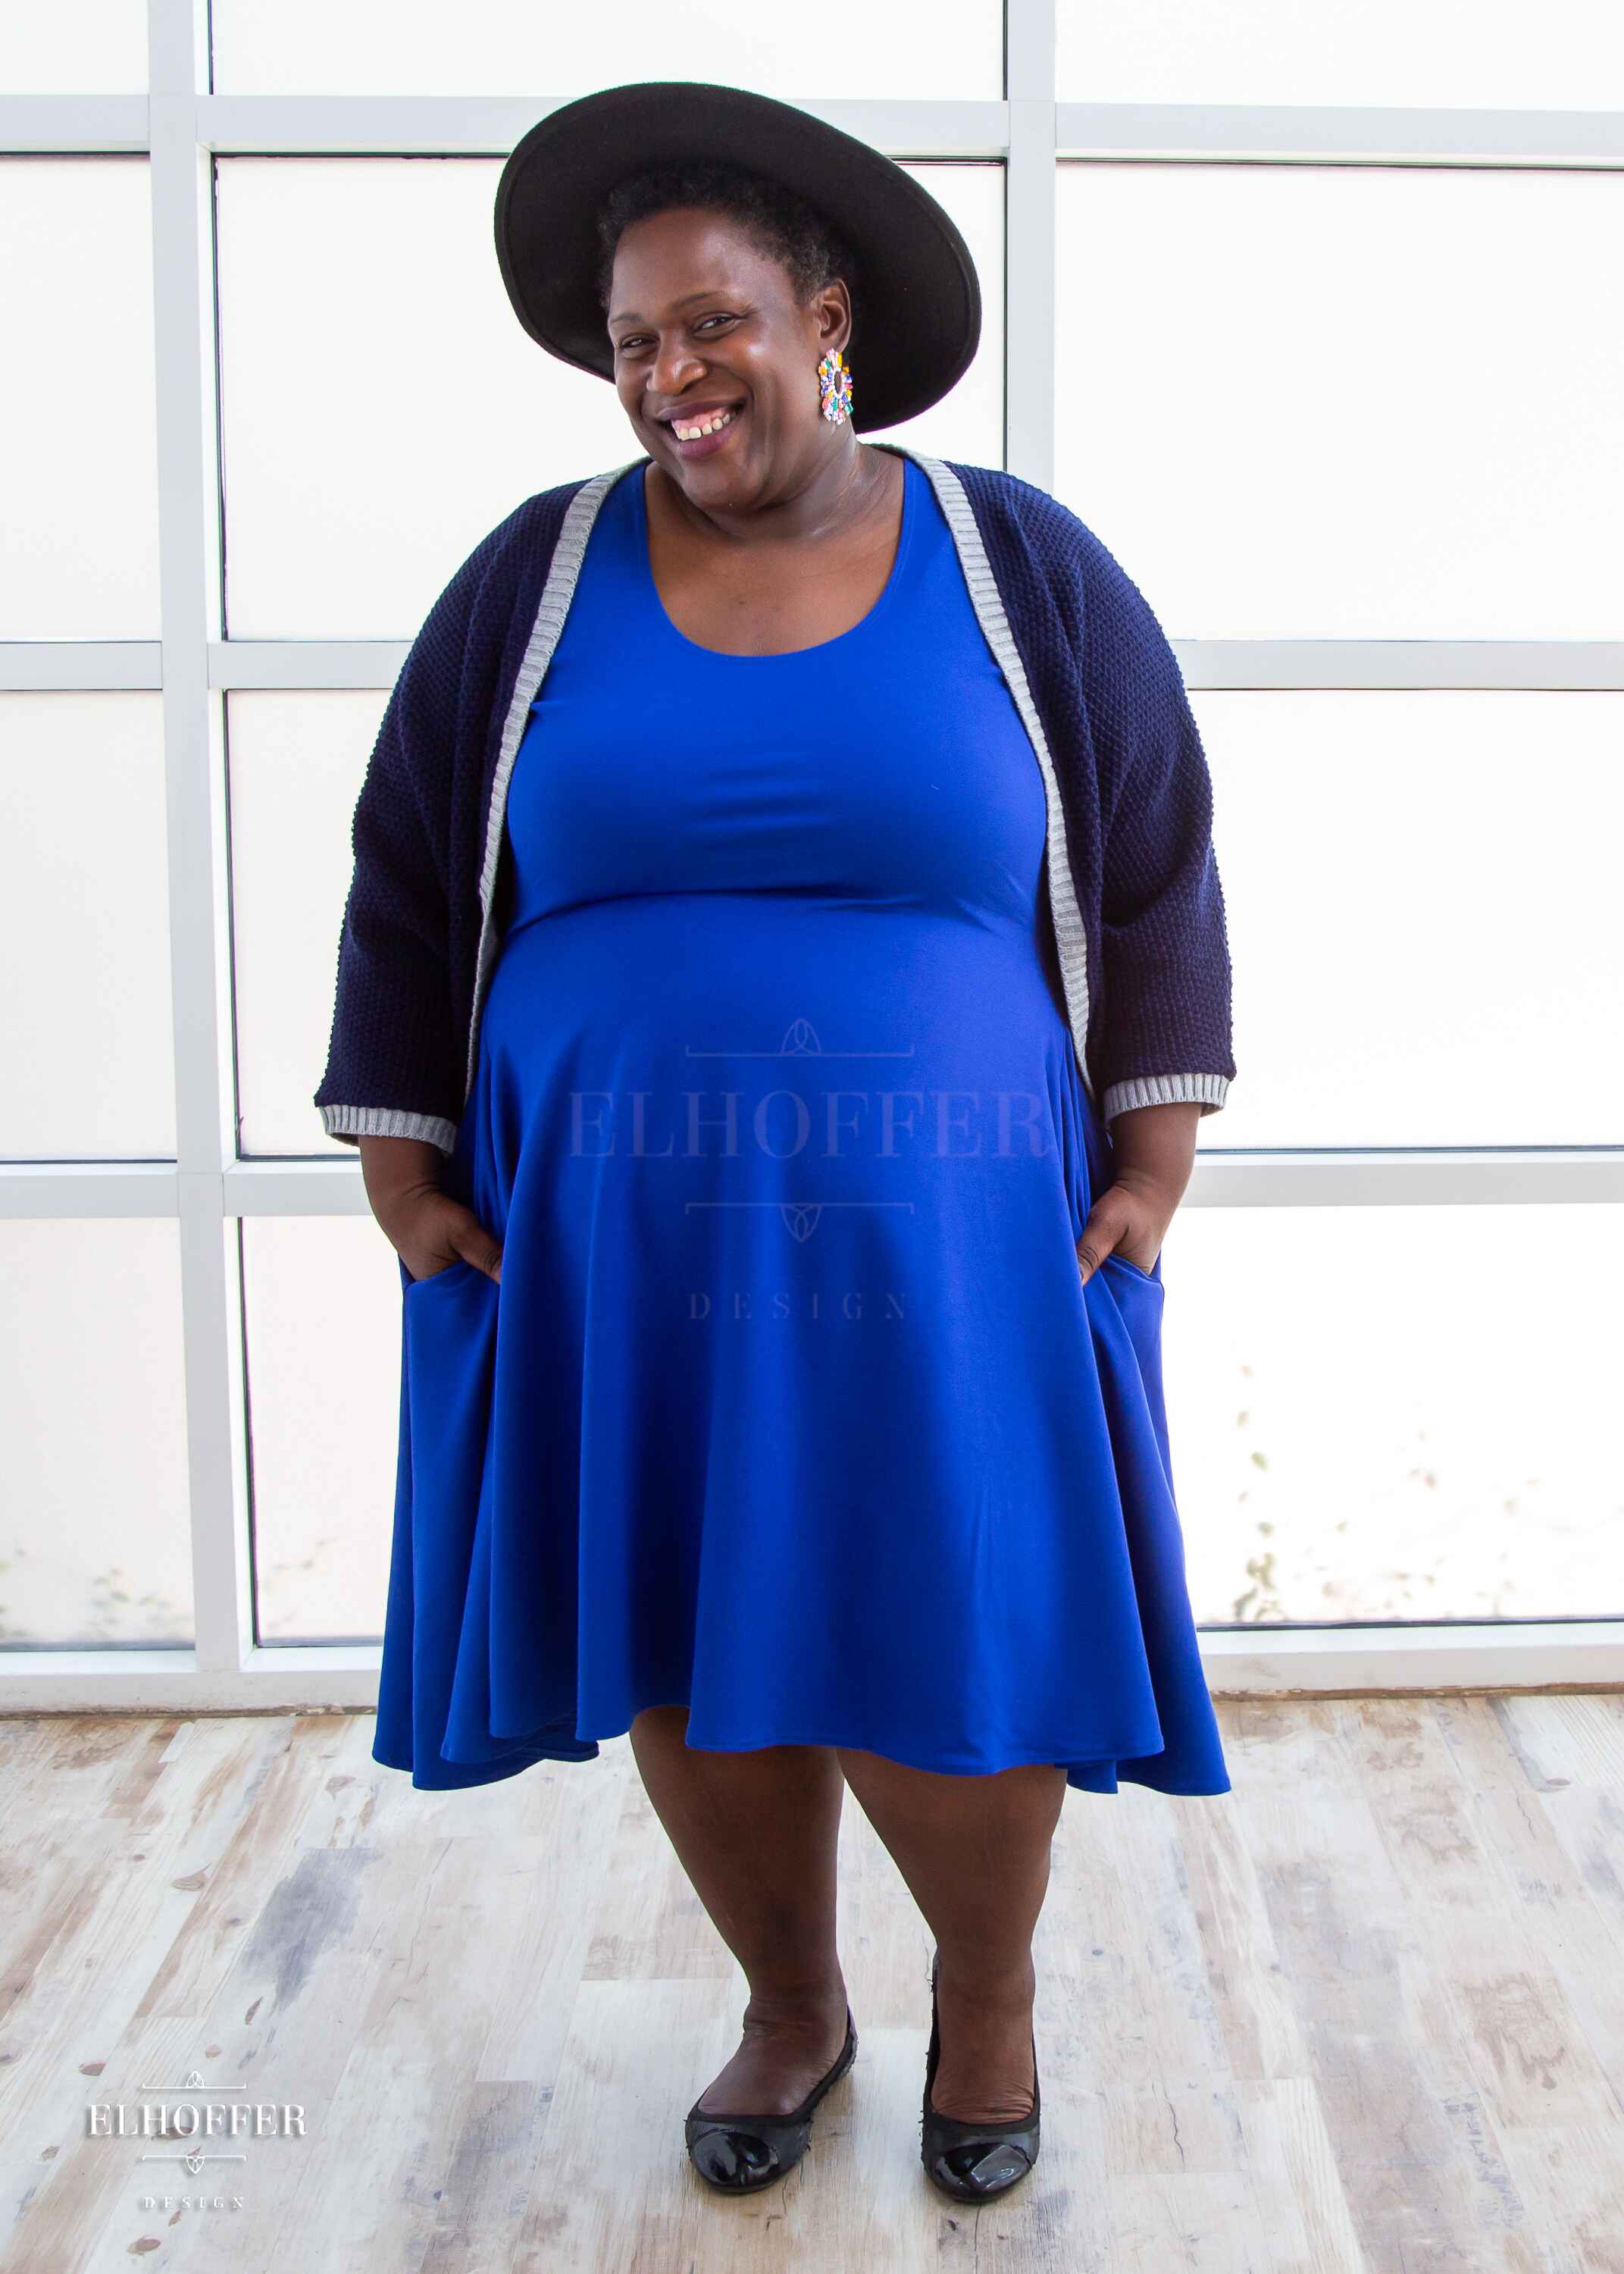 Adalgize, a medium dark skinned 4xl model with short super curly black hair, is smiling while wearing a dark blue loose knit dolman with light grey ribbing around edges and cuffs.  The dolman features 3/4 length sleeves and a magical script design (circle with a T crossing through the circle) on the back.  She paired the dolman with a cobalt blue knee length dress.